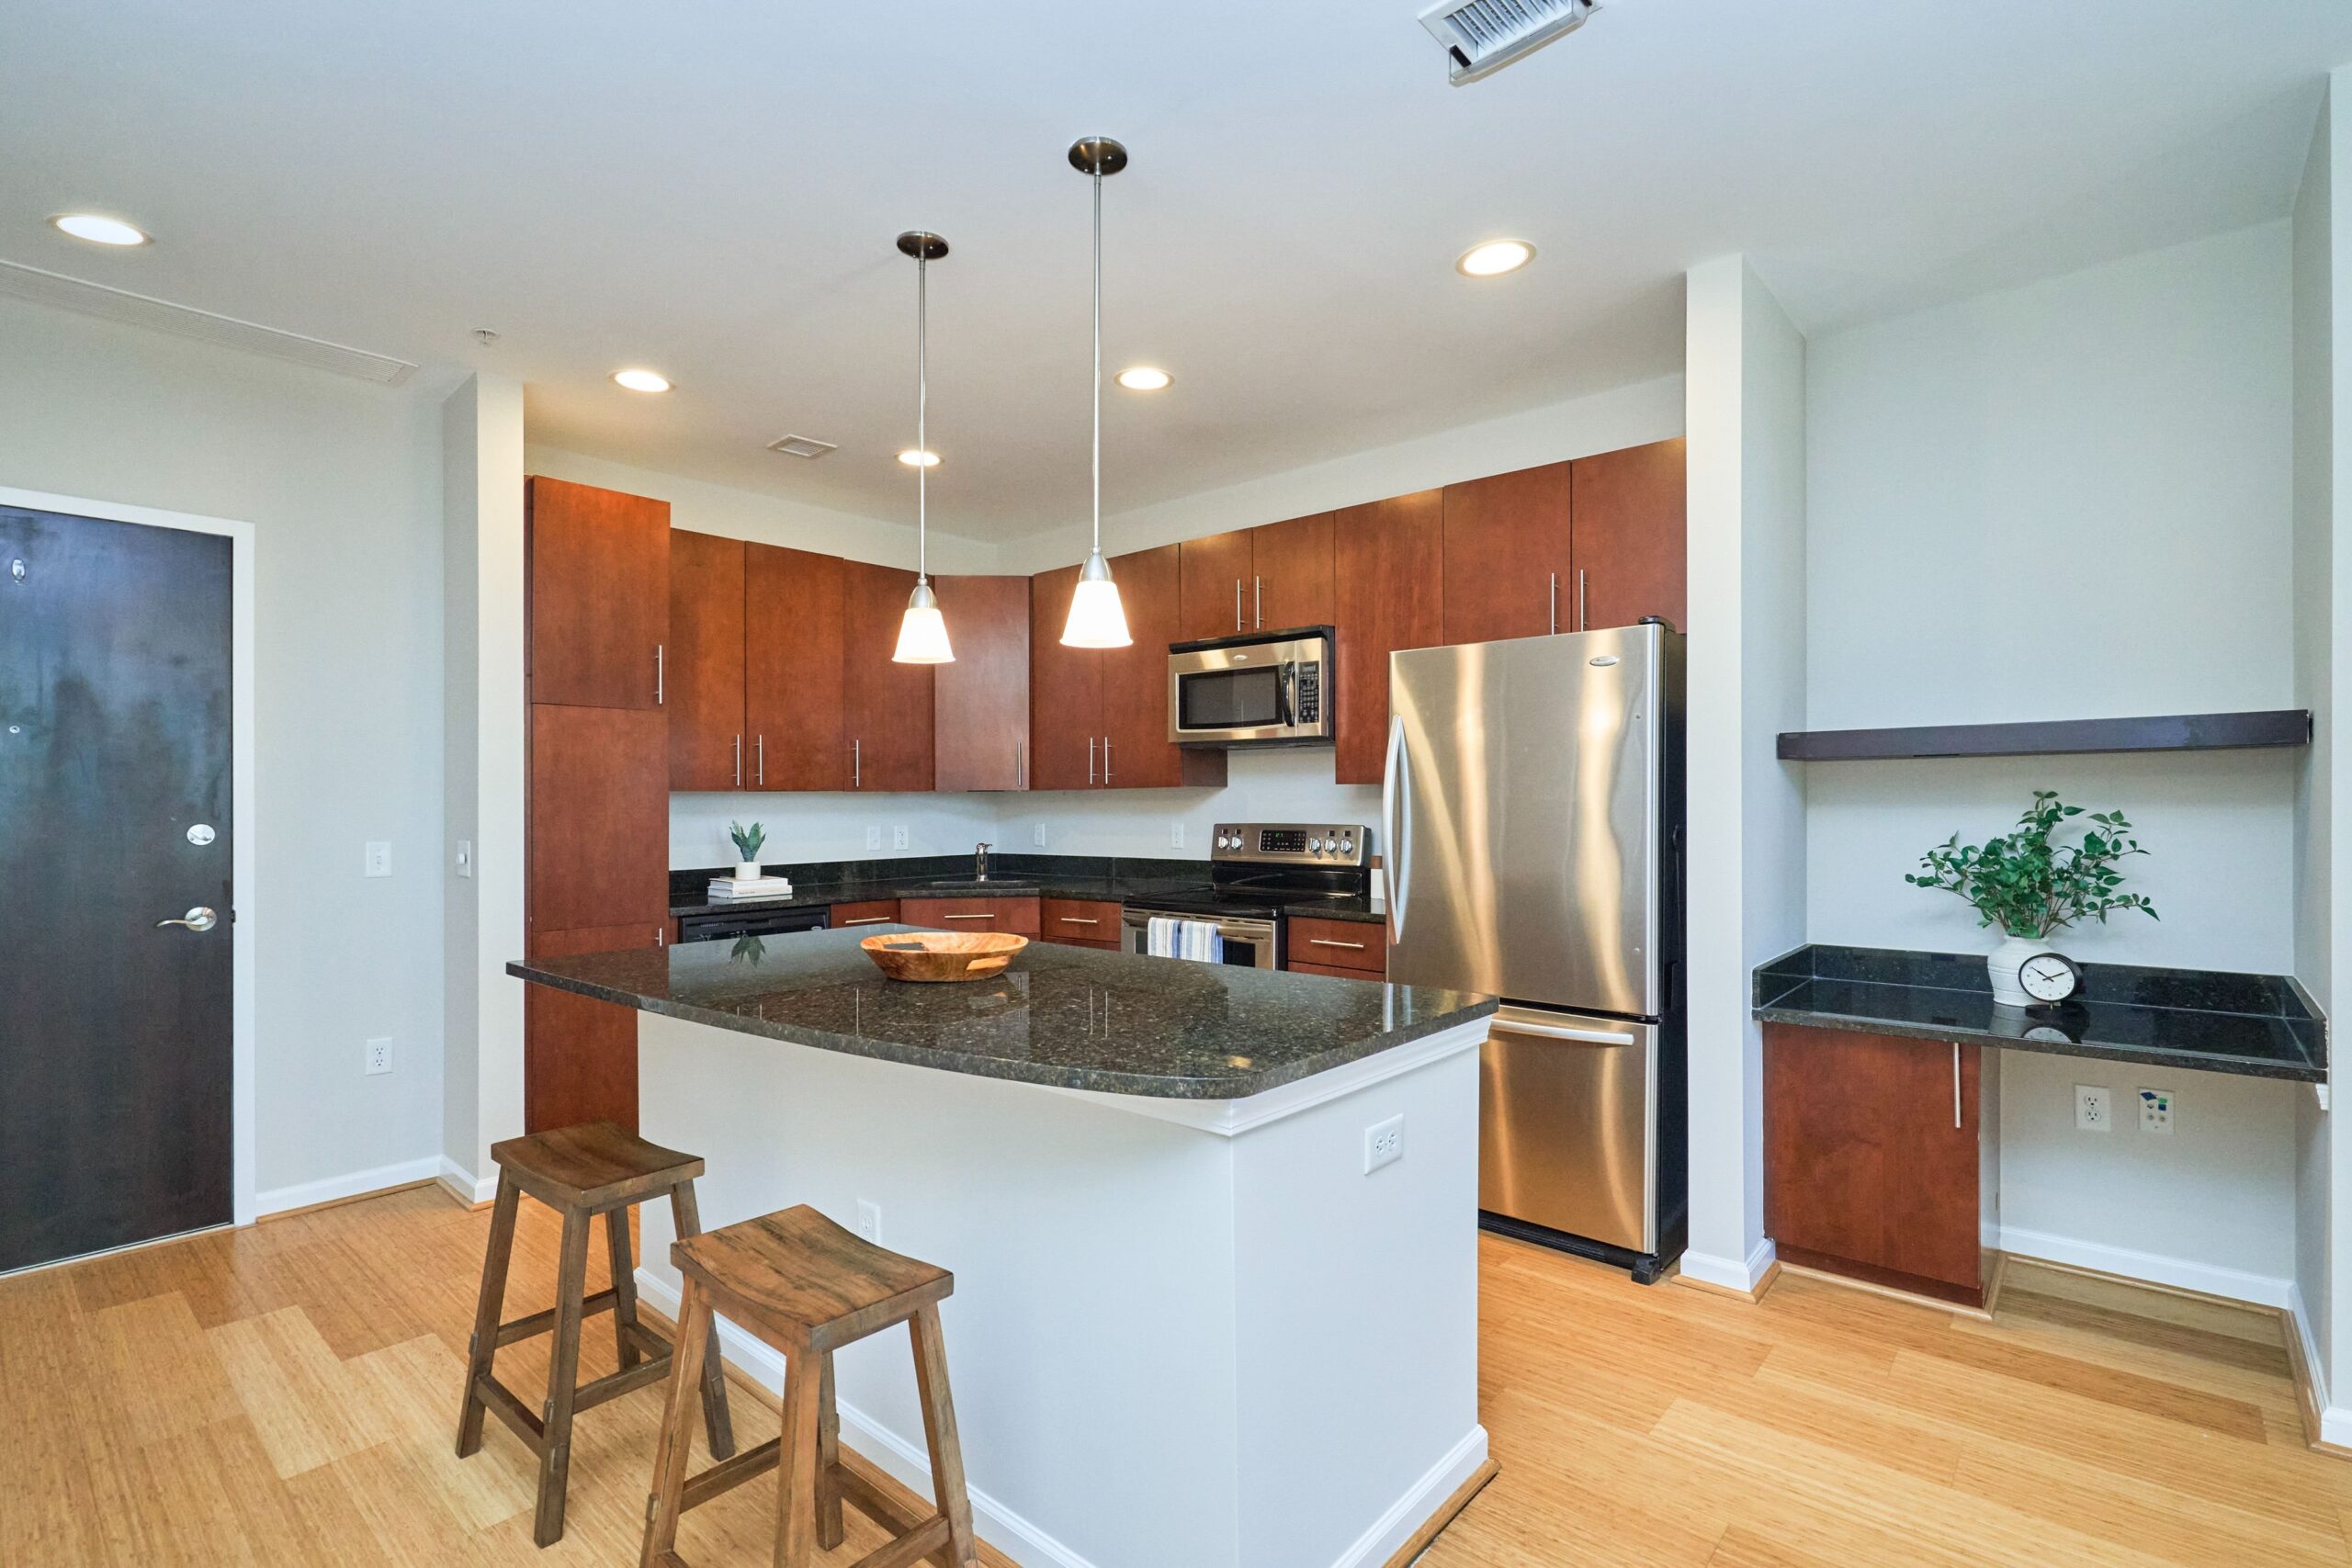 Professional interior photo of 444 W Broad St Unit 631 - showing the open kitchen with granite island next to a desk area with a shelf and under cabinet